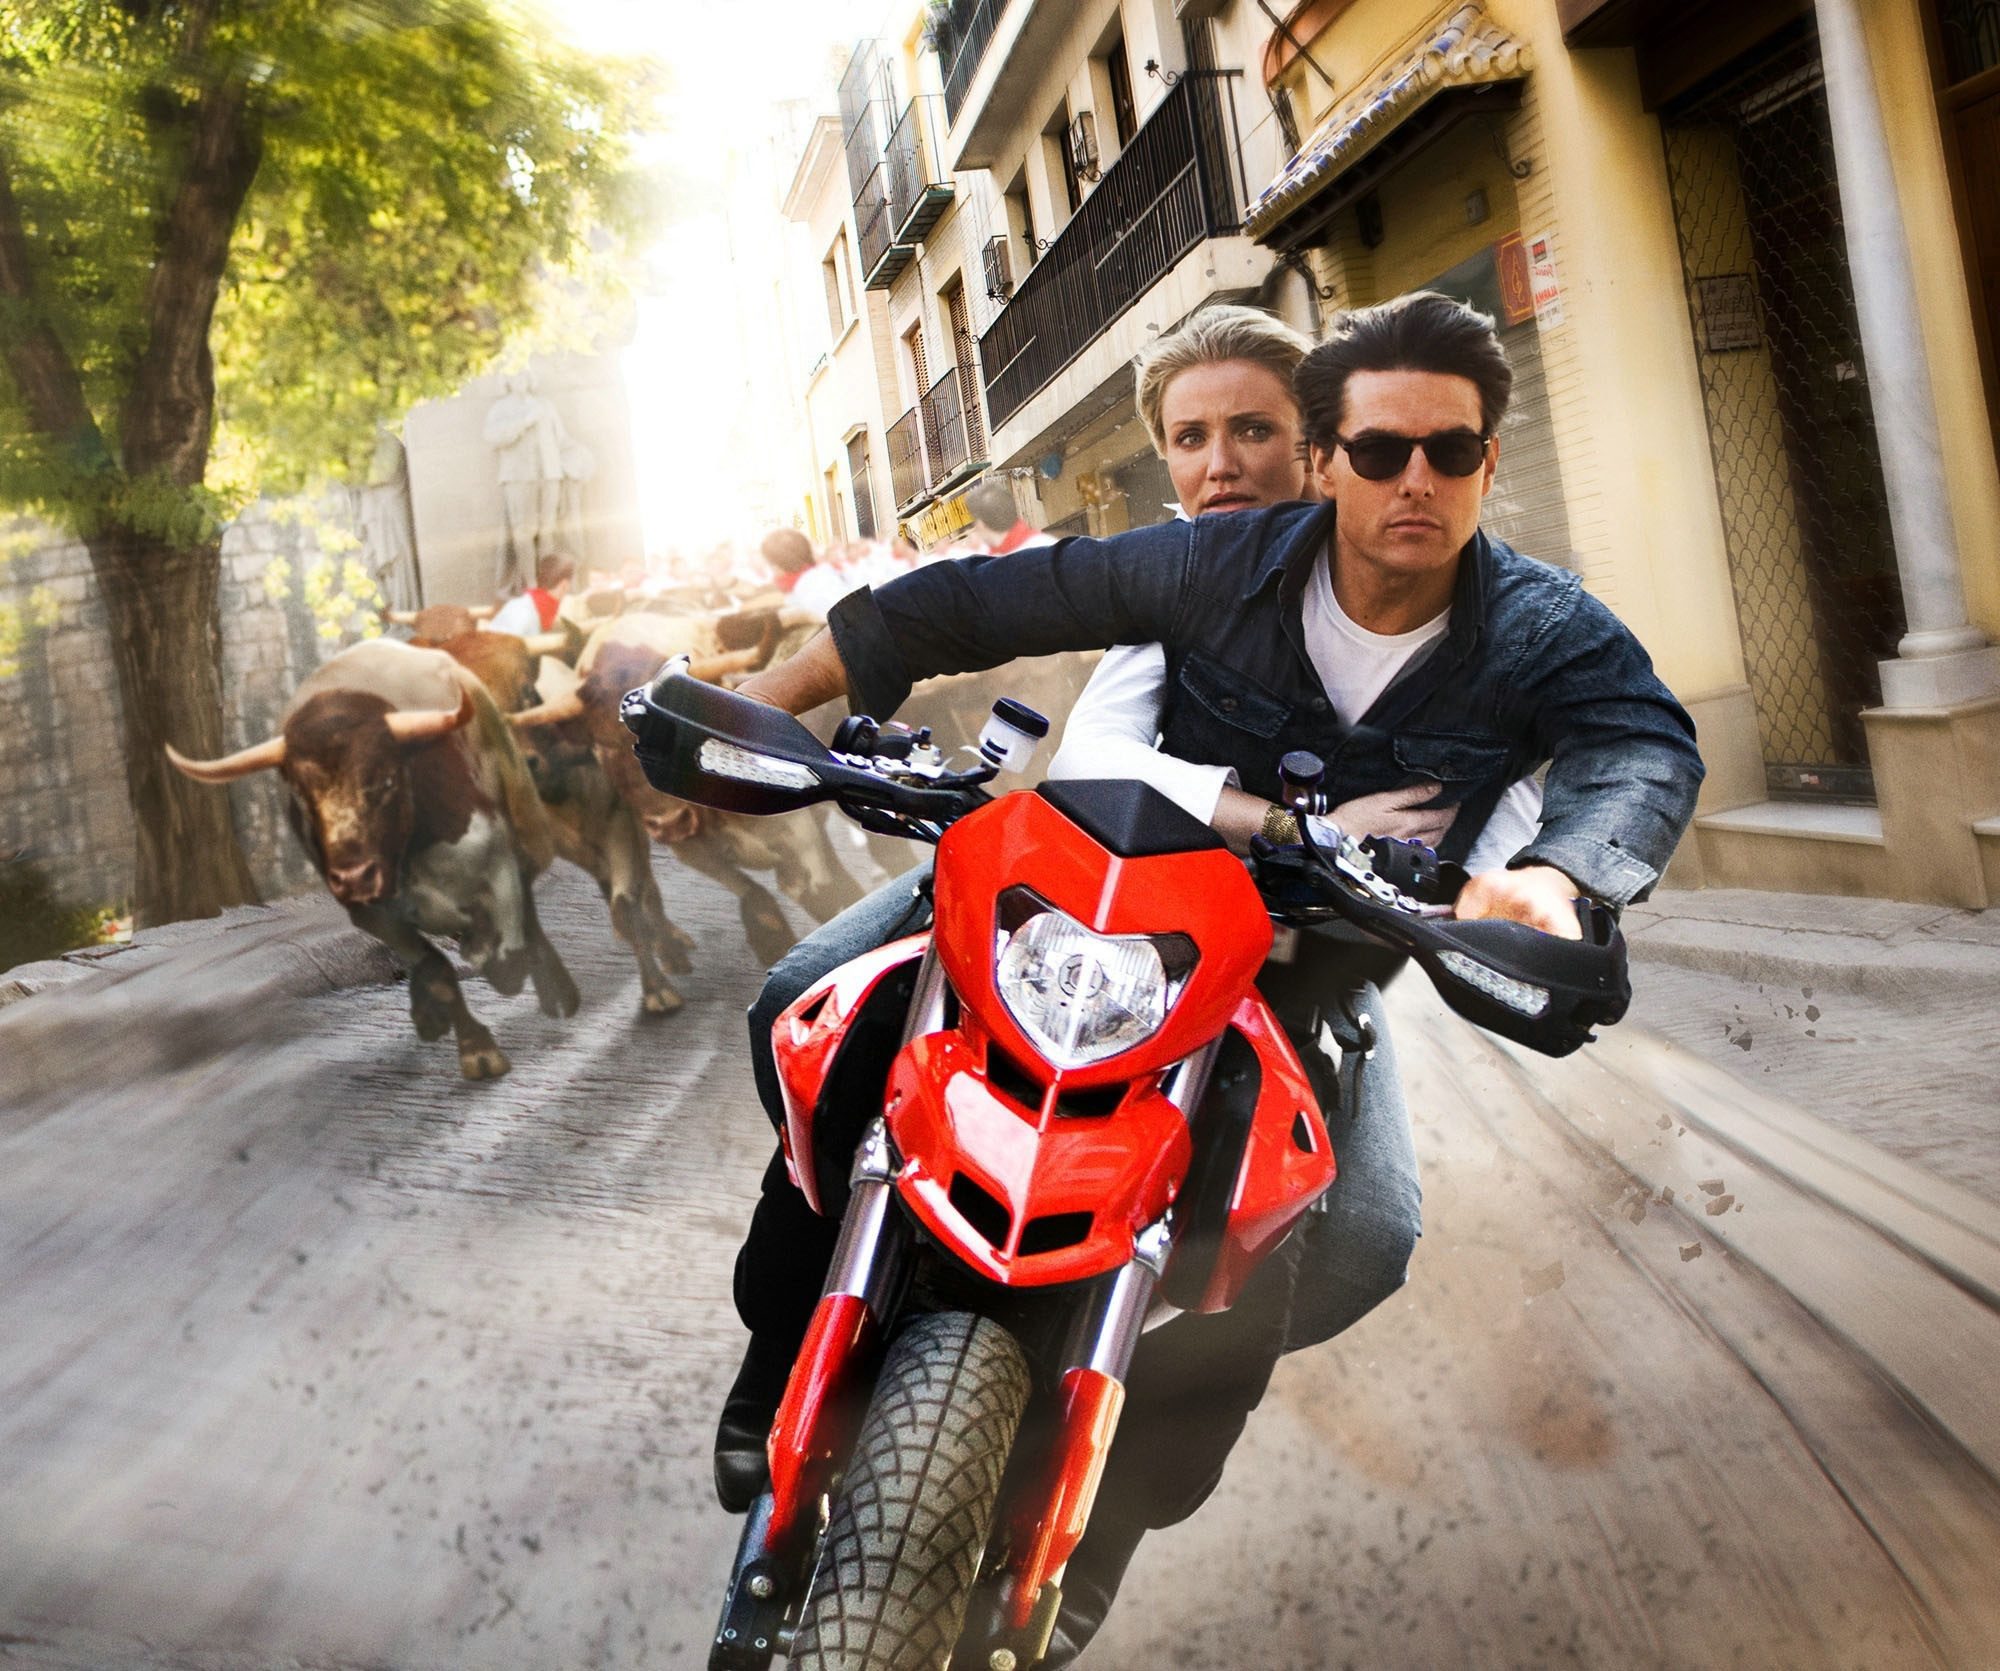 Krasch, Knight and Day, Tom Cruise